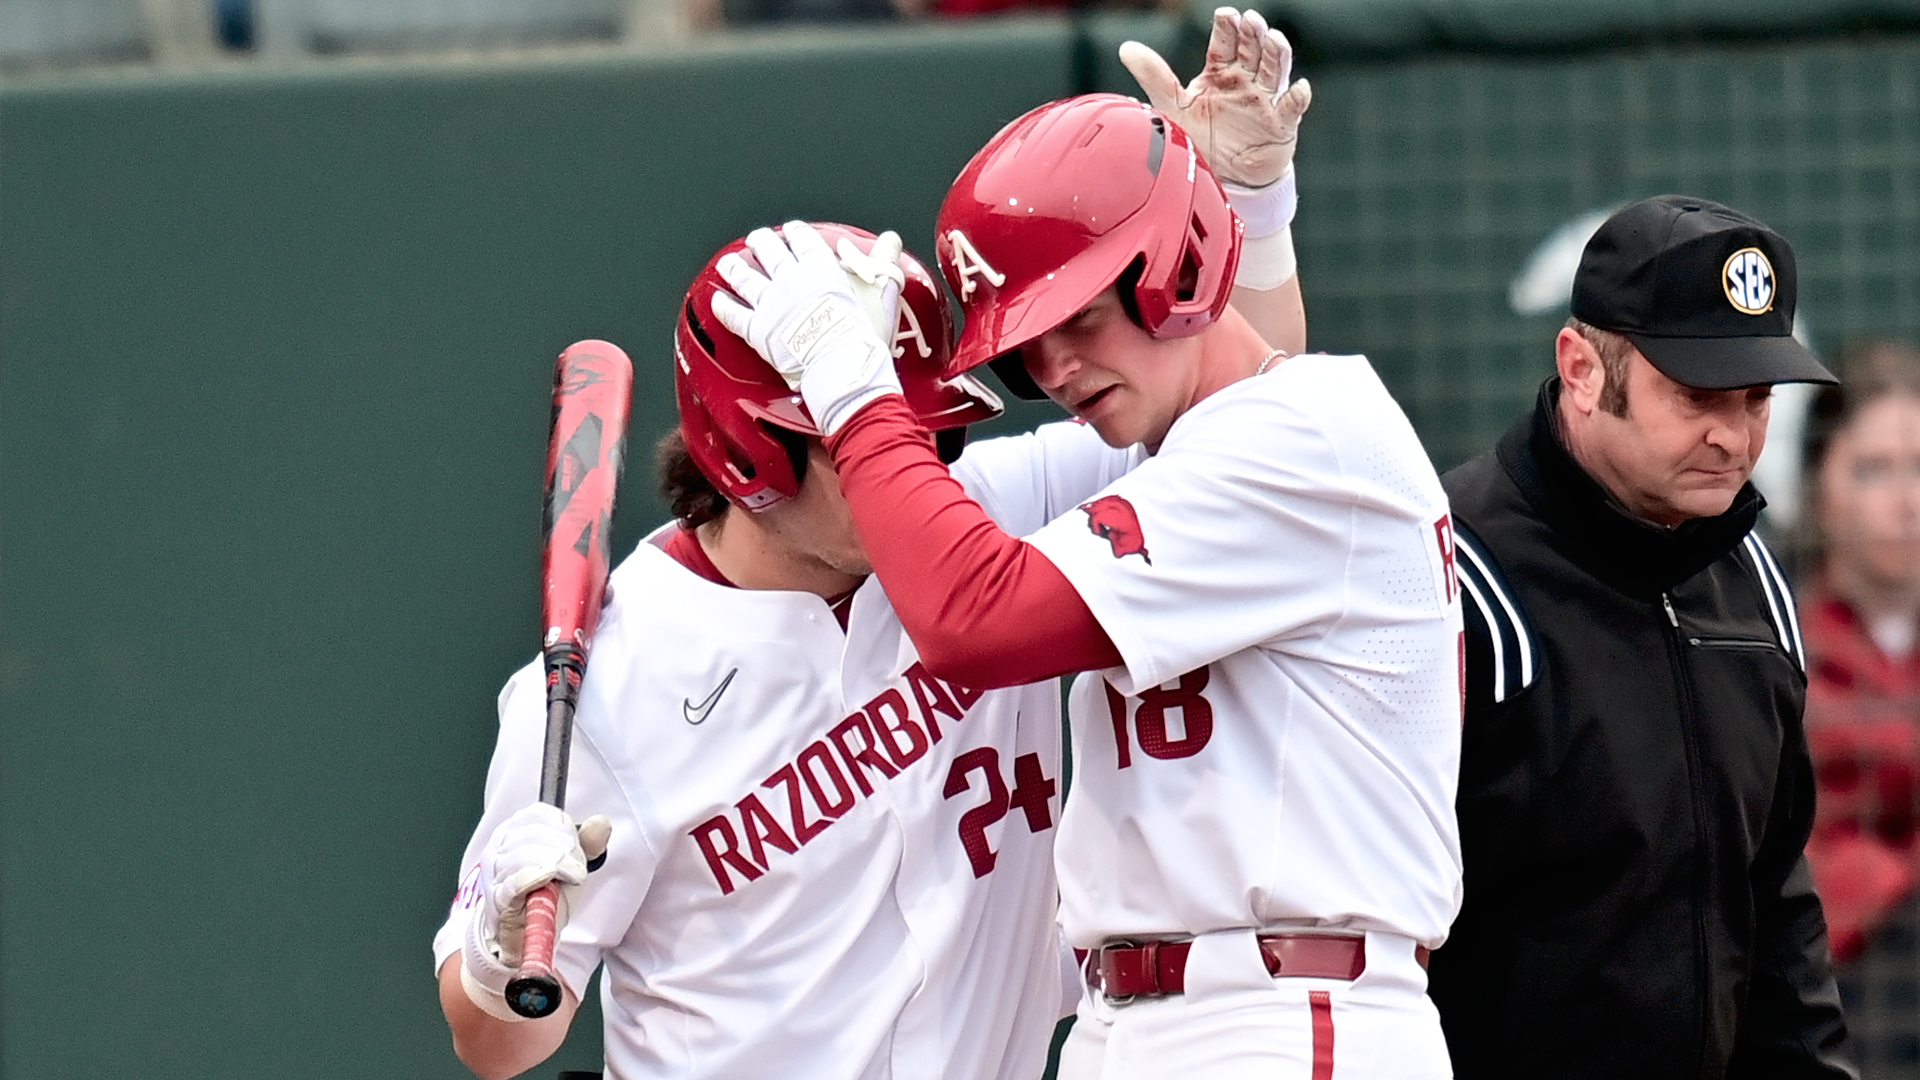 Hogs Return Home for Midweek Game against Mavs